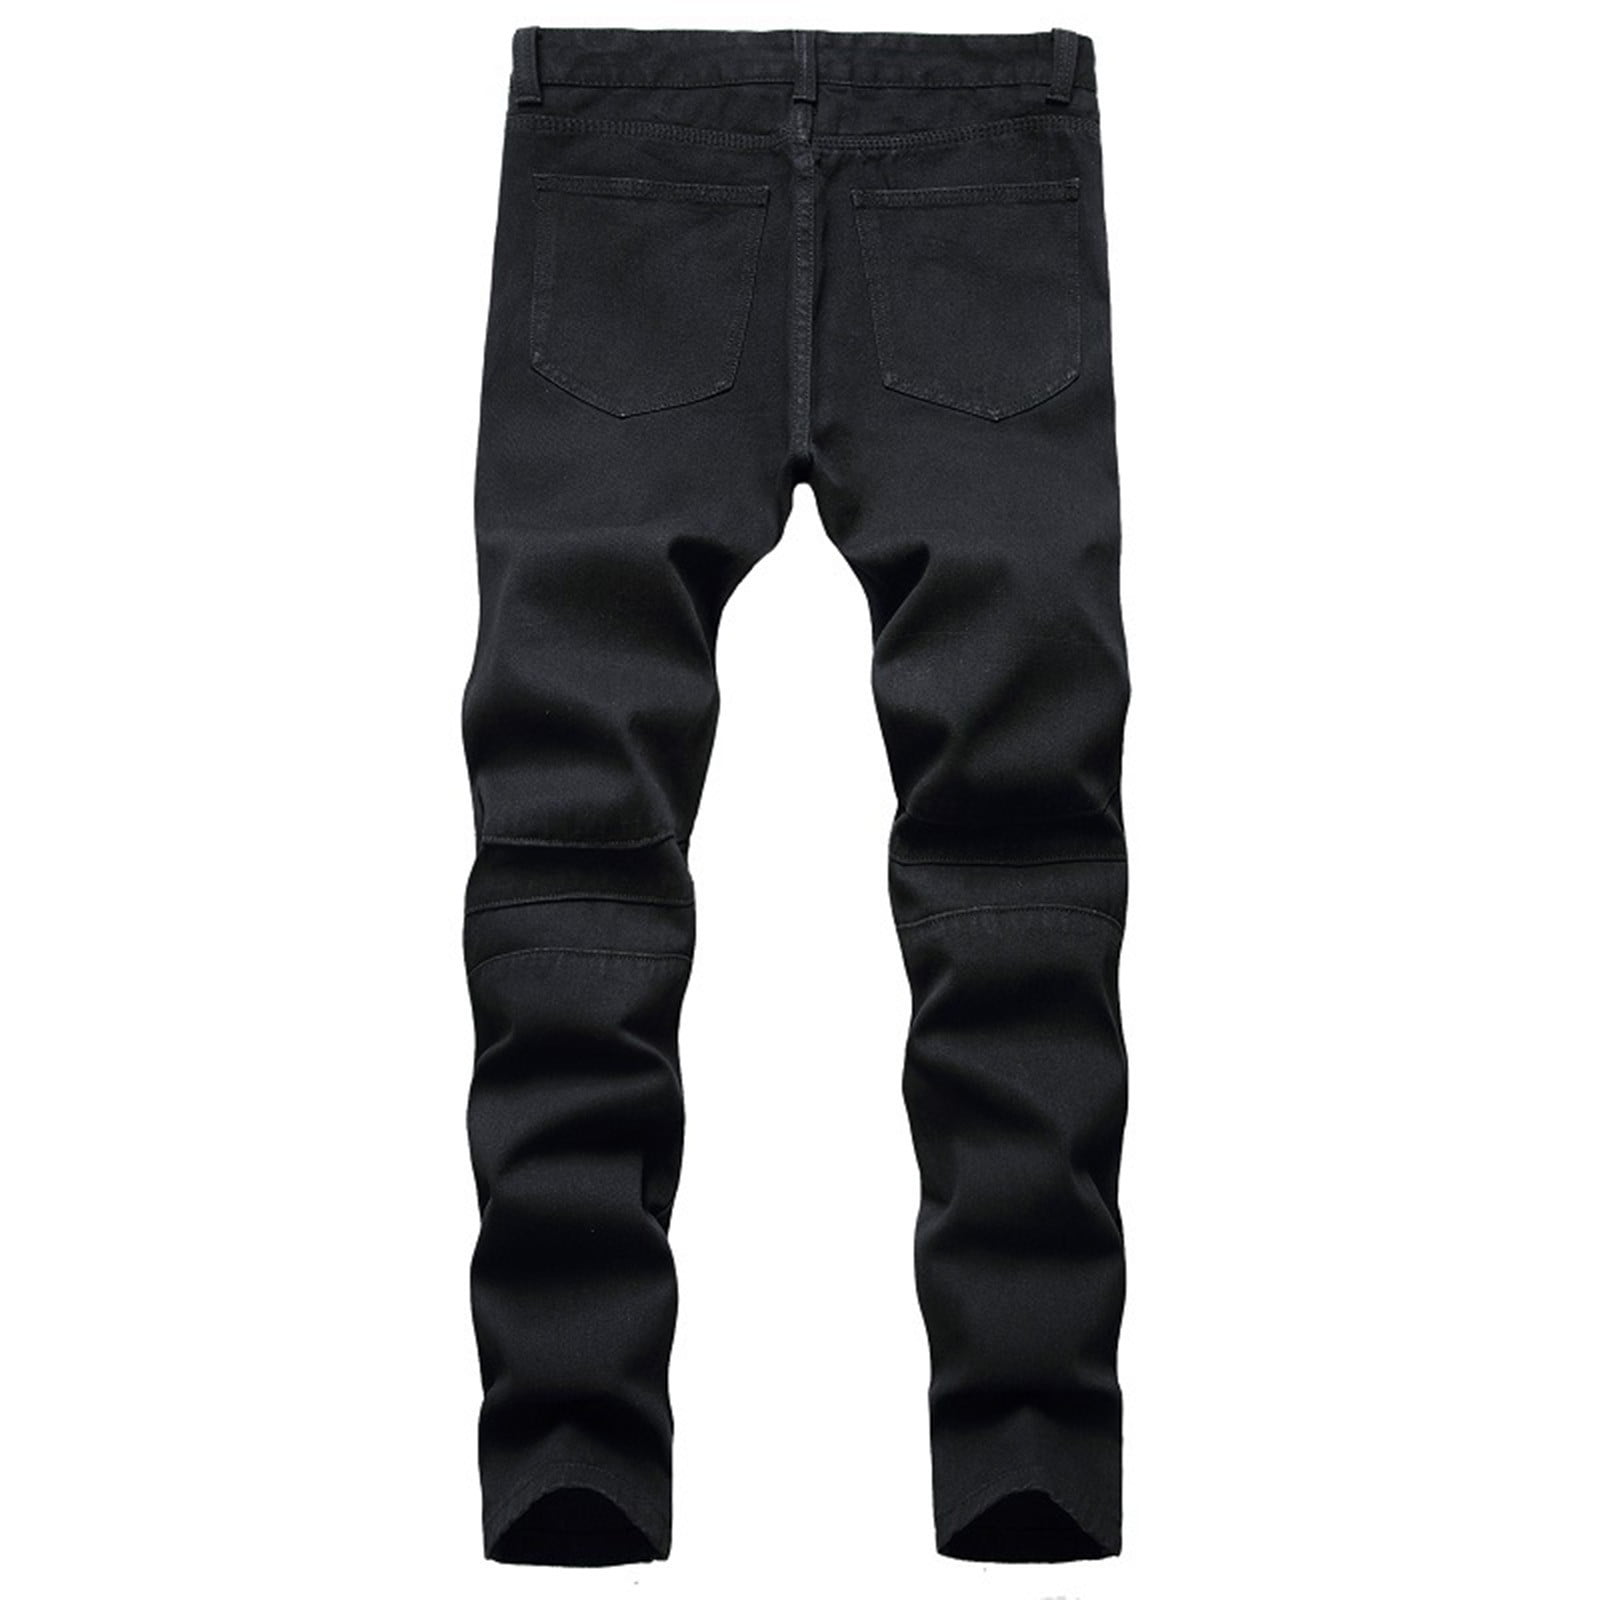 Buy the perfect pair of jeans for men online – Levis India Store